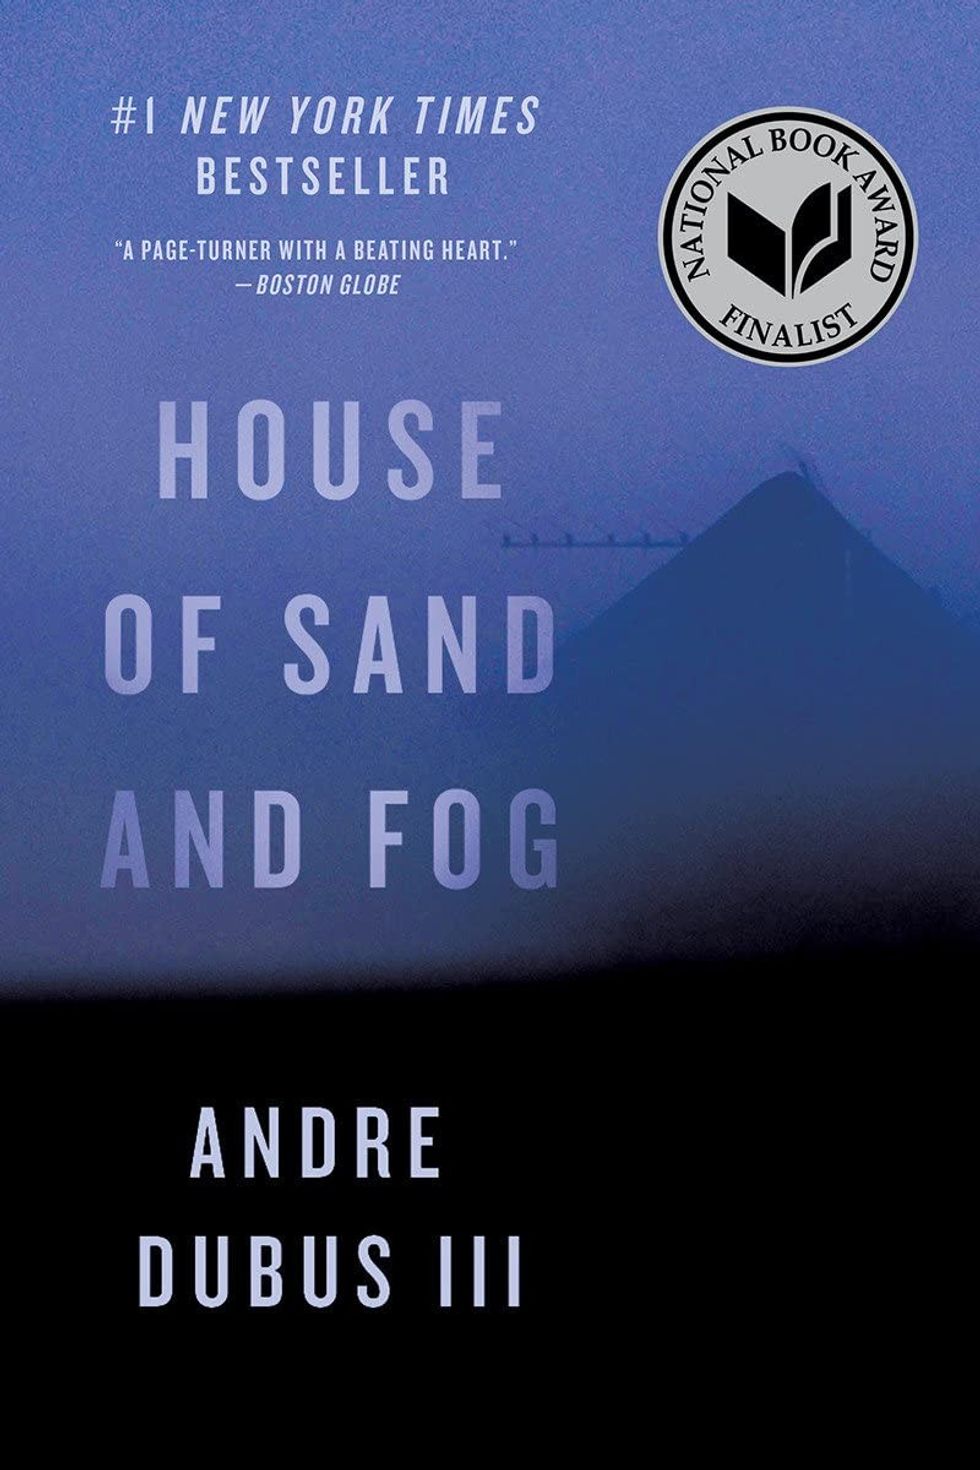 "House of Sand and Fog" by Andre Dubus III